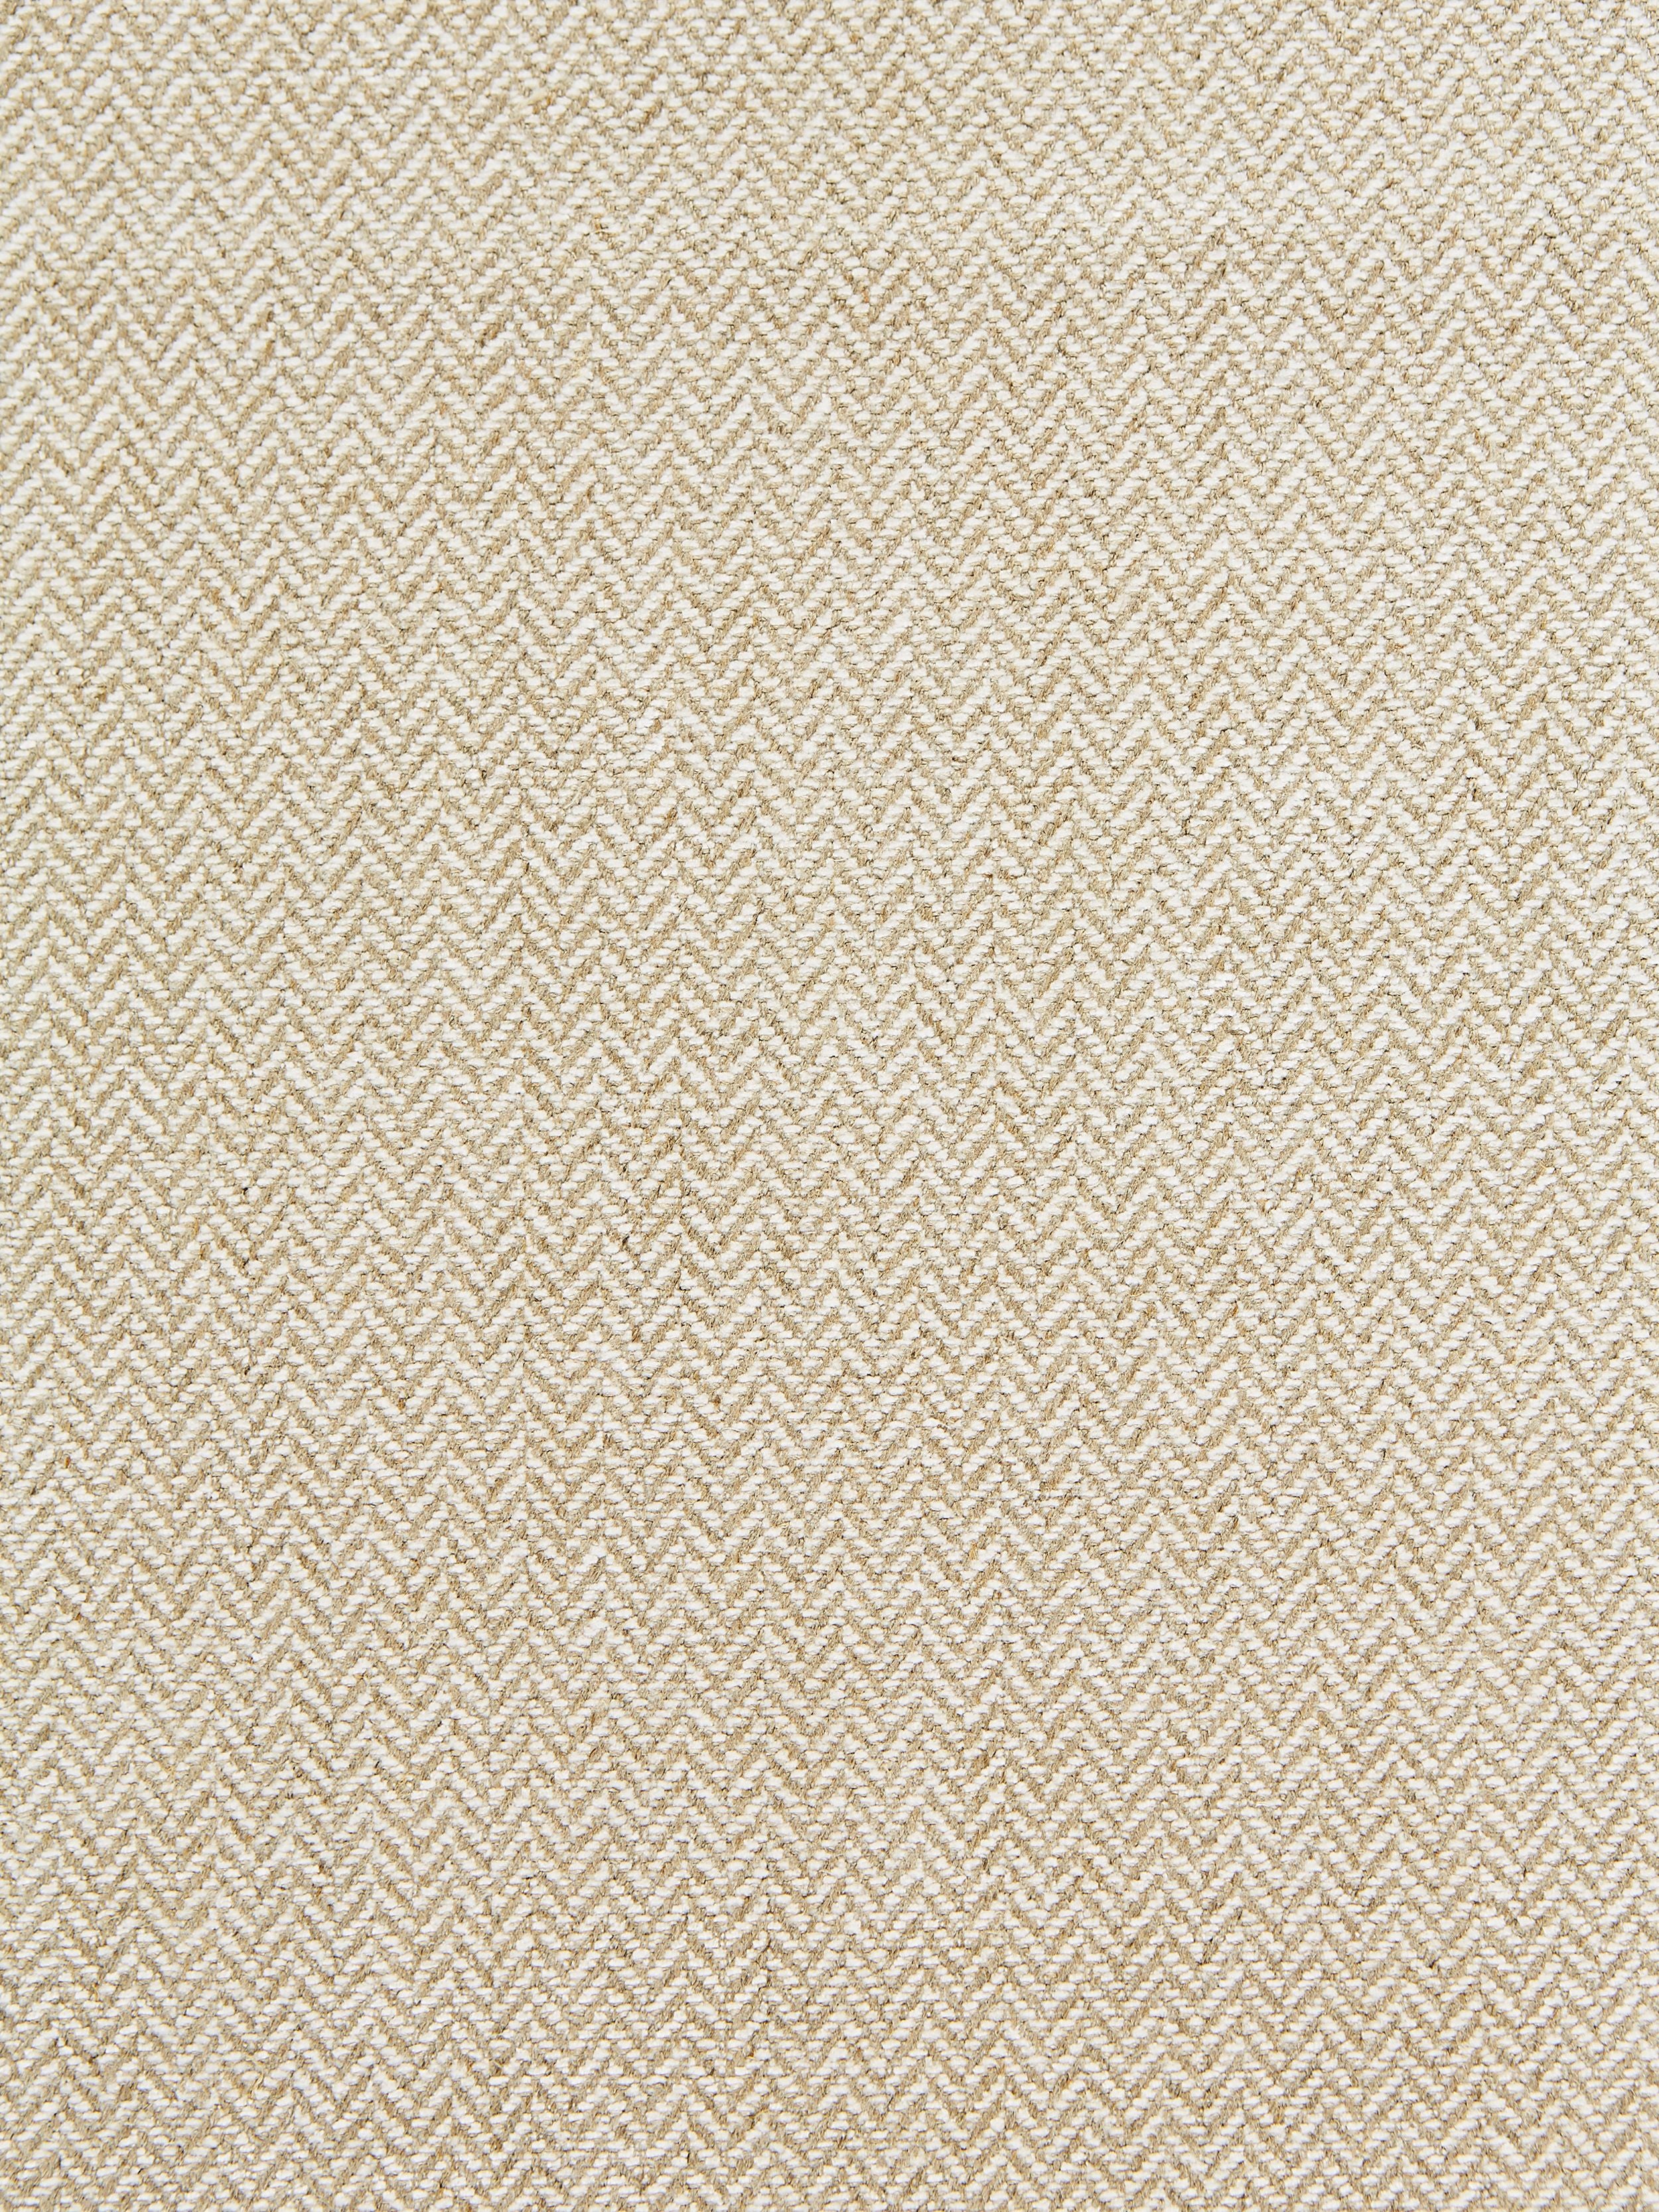 Oxford Herringbone Weave fabric in flax color - pattern number SC 000127006 - by Scalamandre in the Scalamandre Fabrics Book 1 collection